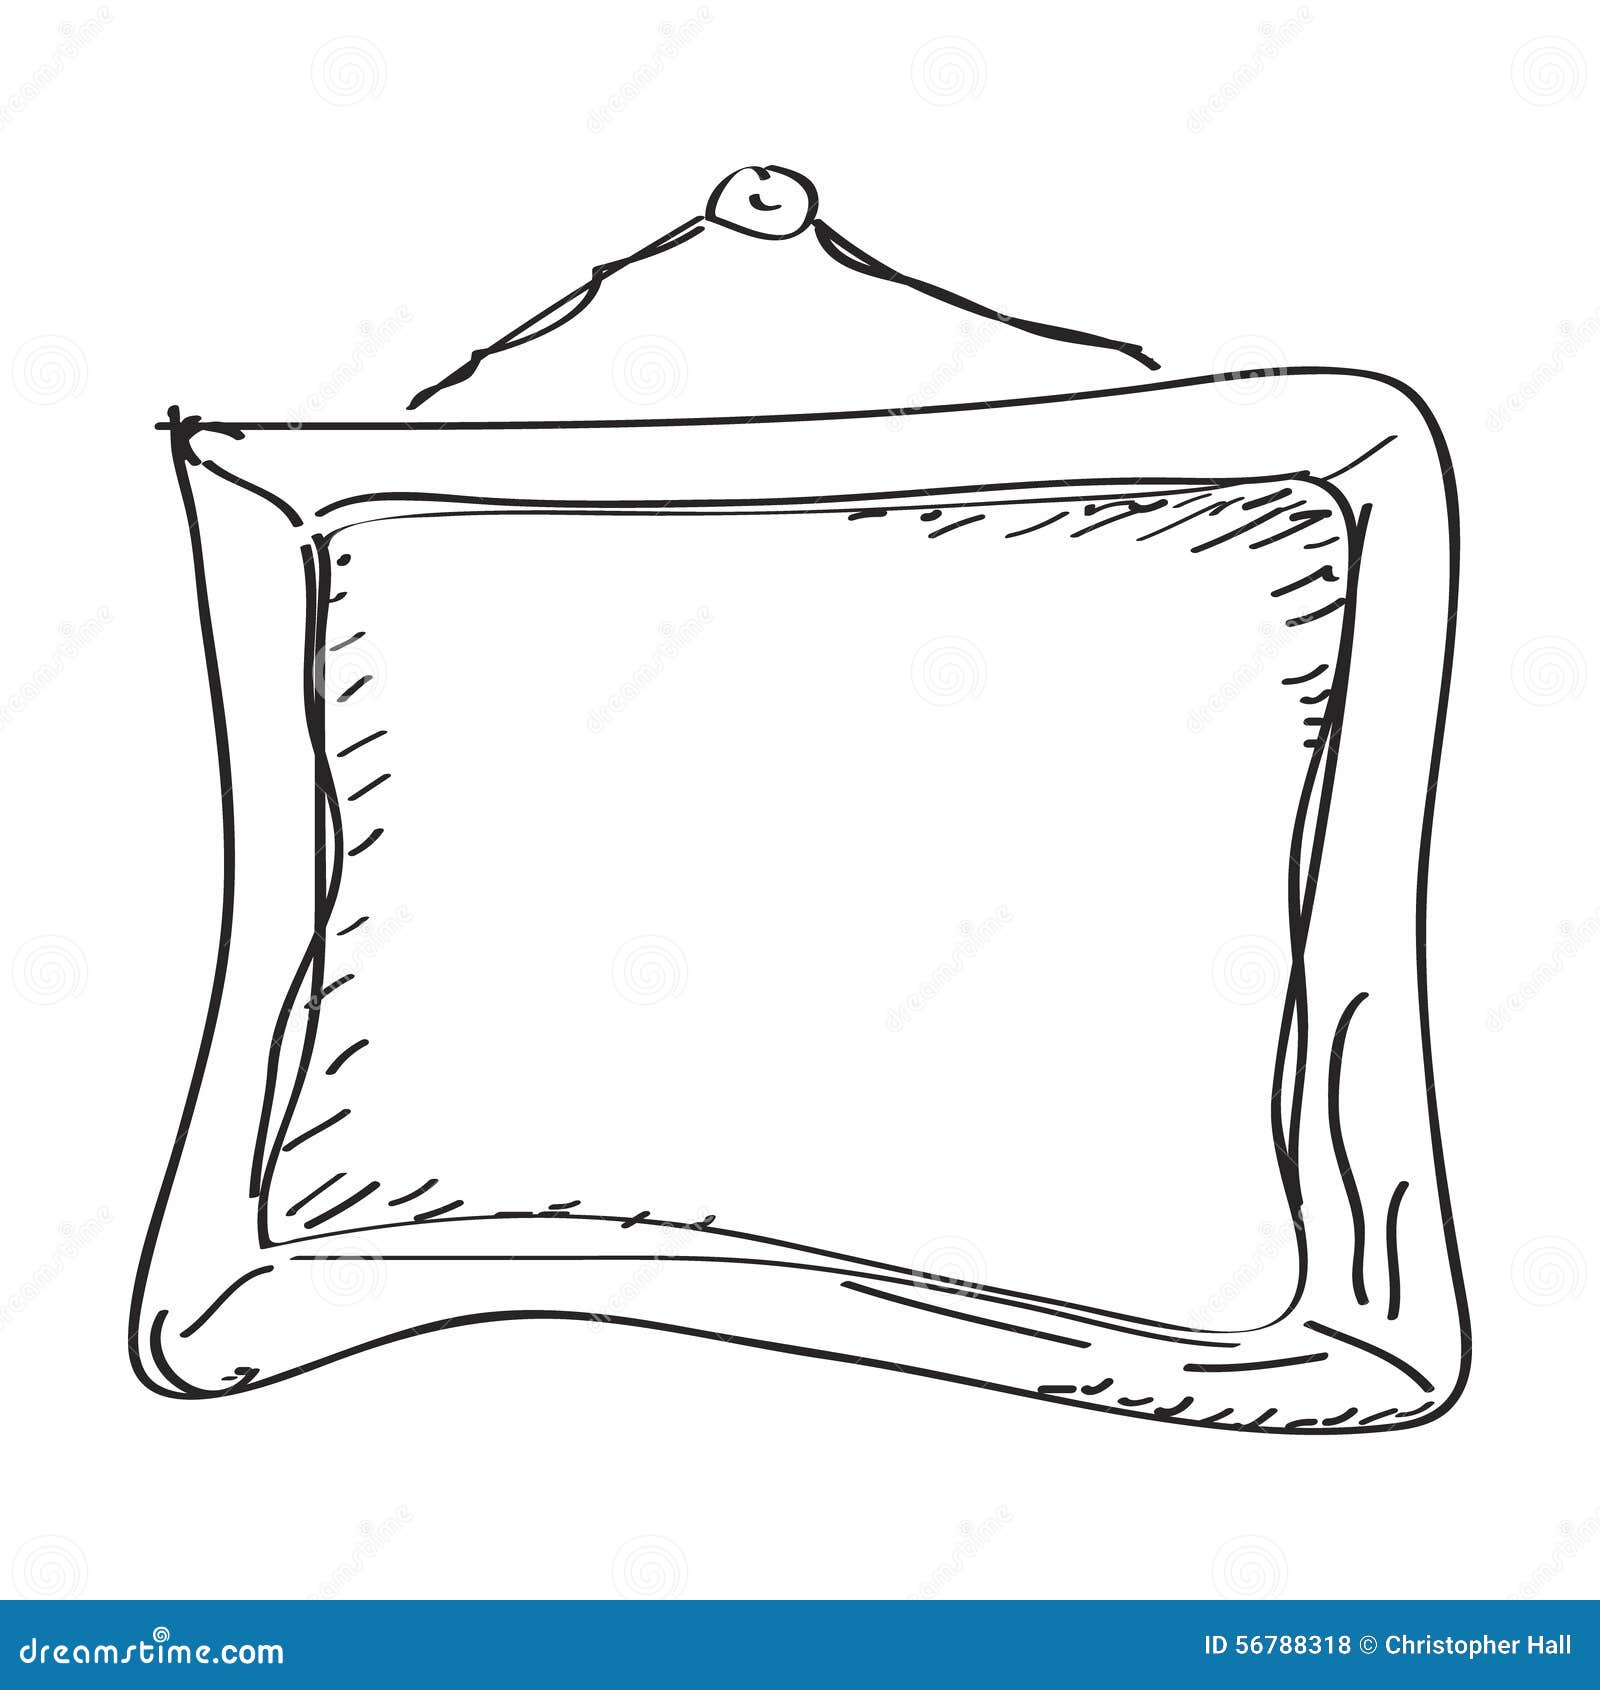 Simple Doodle Of A Picture Frame Stock Vector